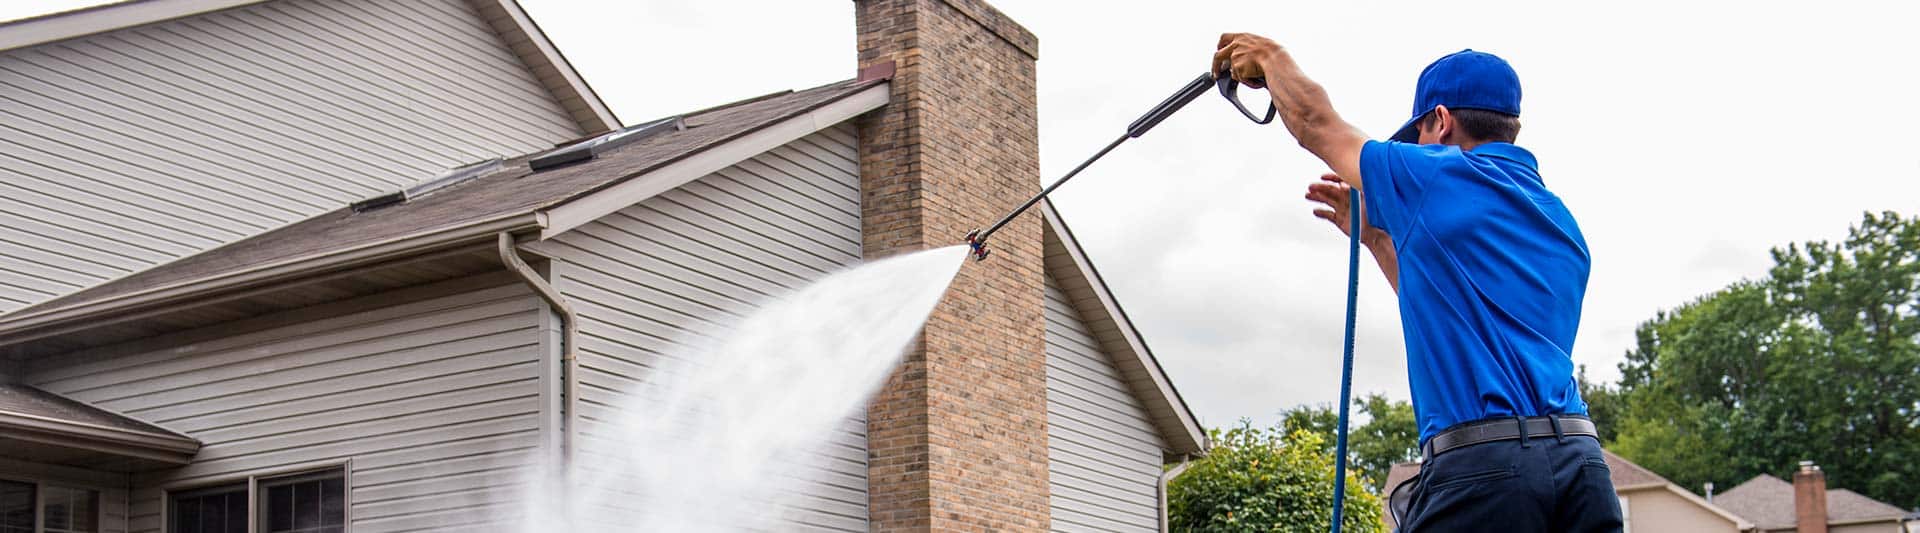 Roof Cleaning Services In Mars Pa